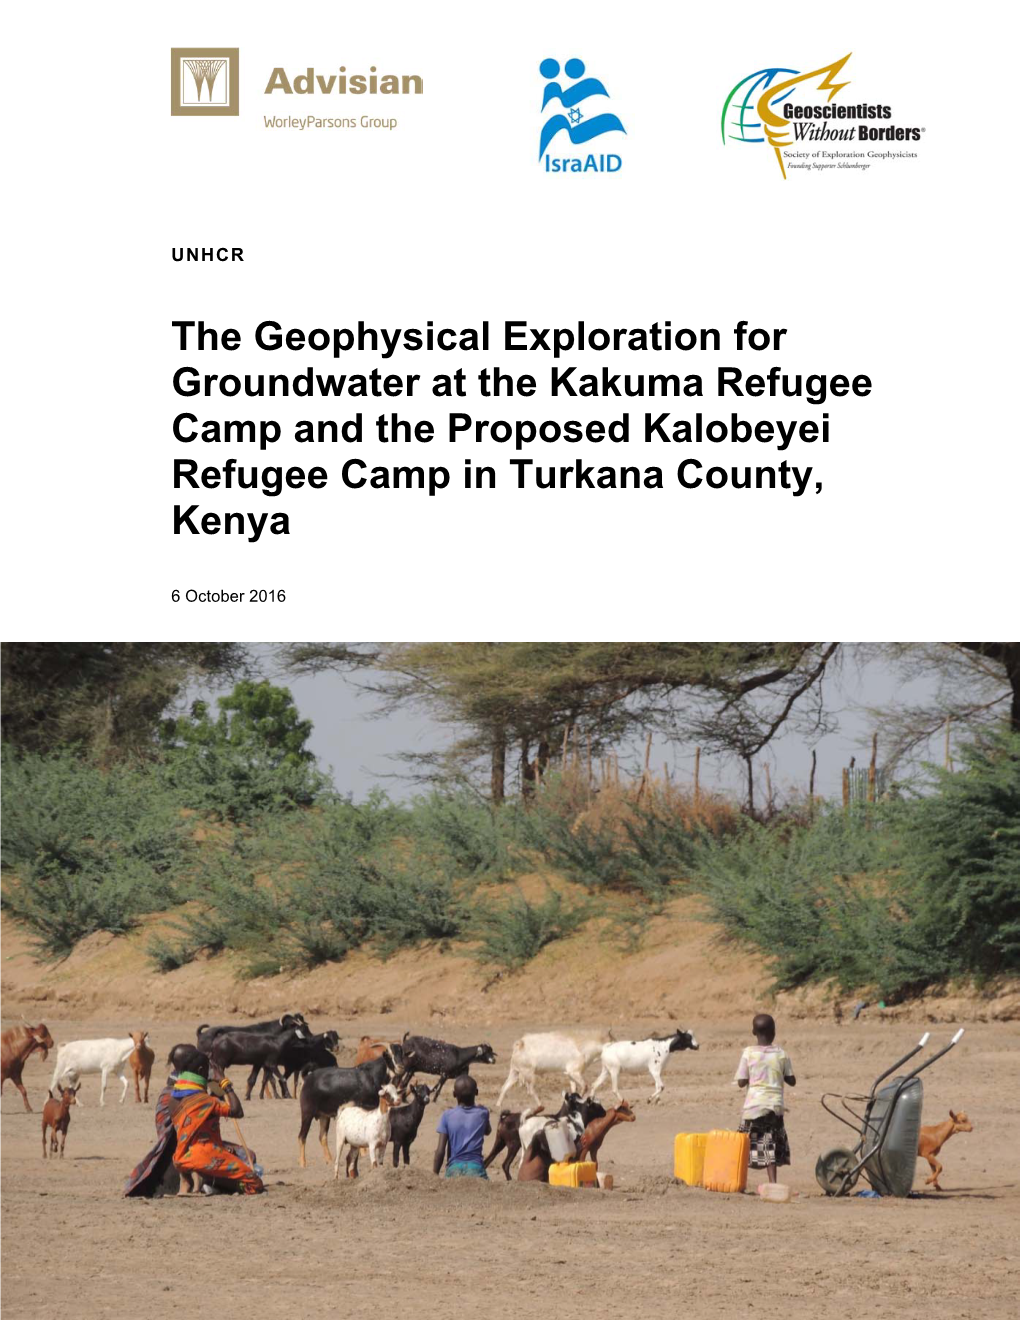 The Geophysical Exploration for Groundwater at the Kakuma Refugee Camp and the Proposed Kalobeyei Refugee Camp in Turkana County, Kenya